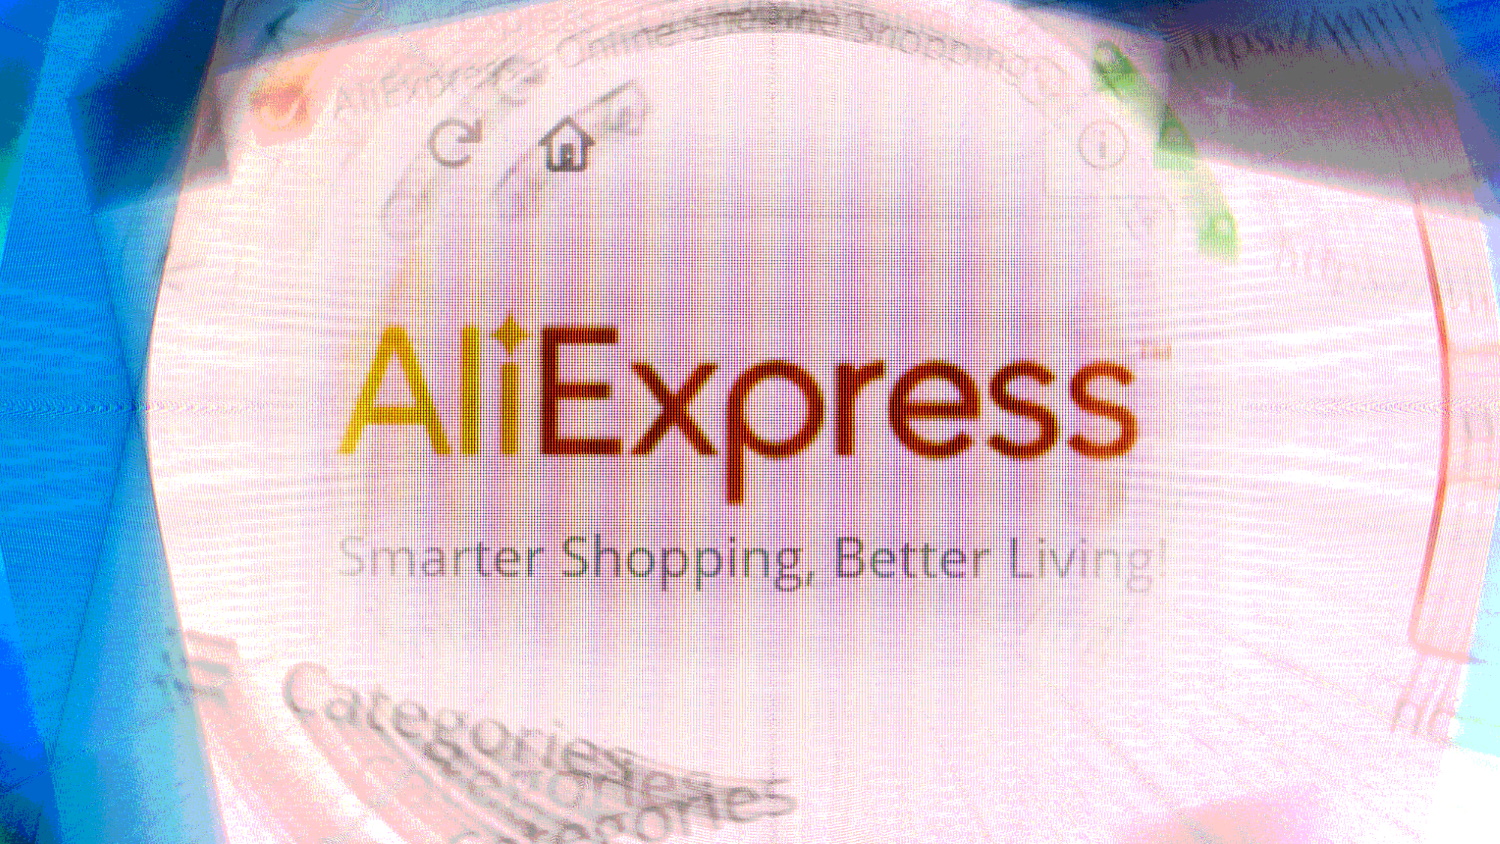 Clearing Customs Aliexpress